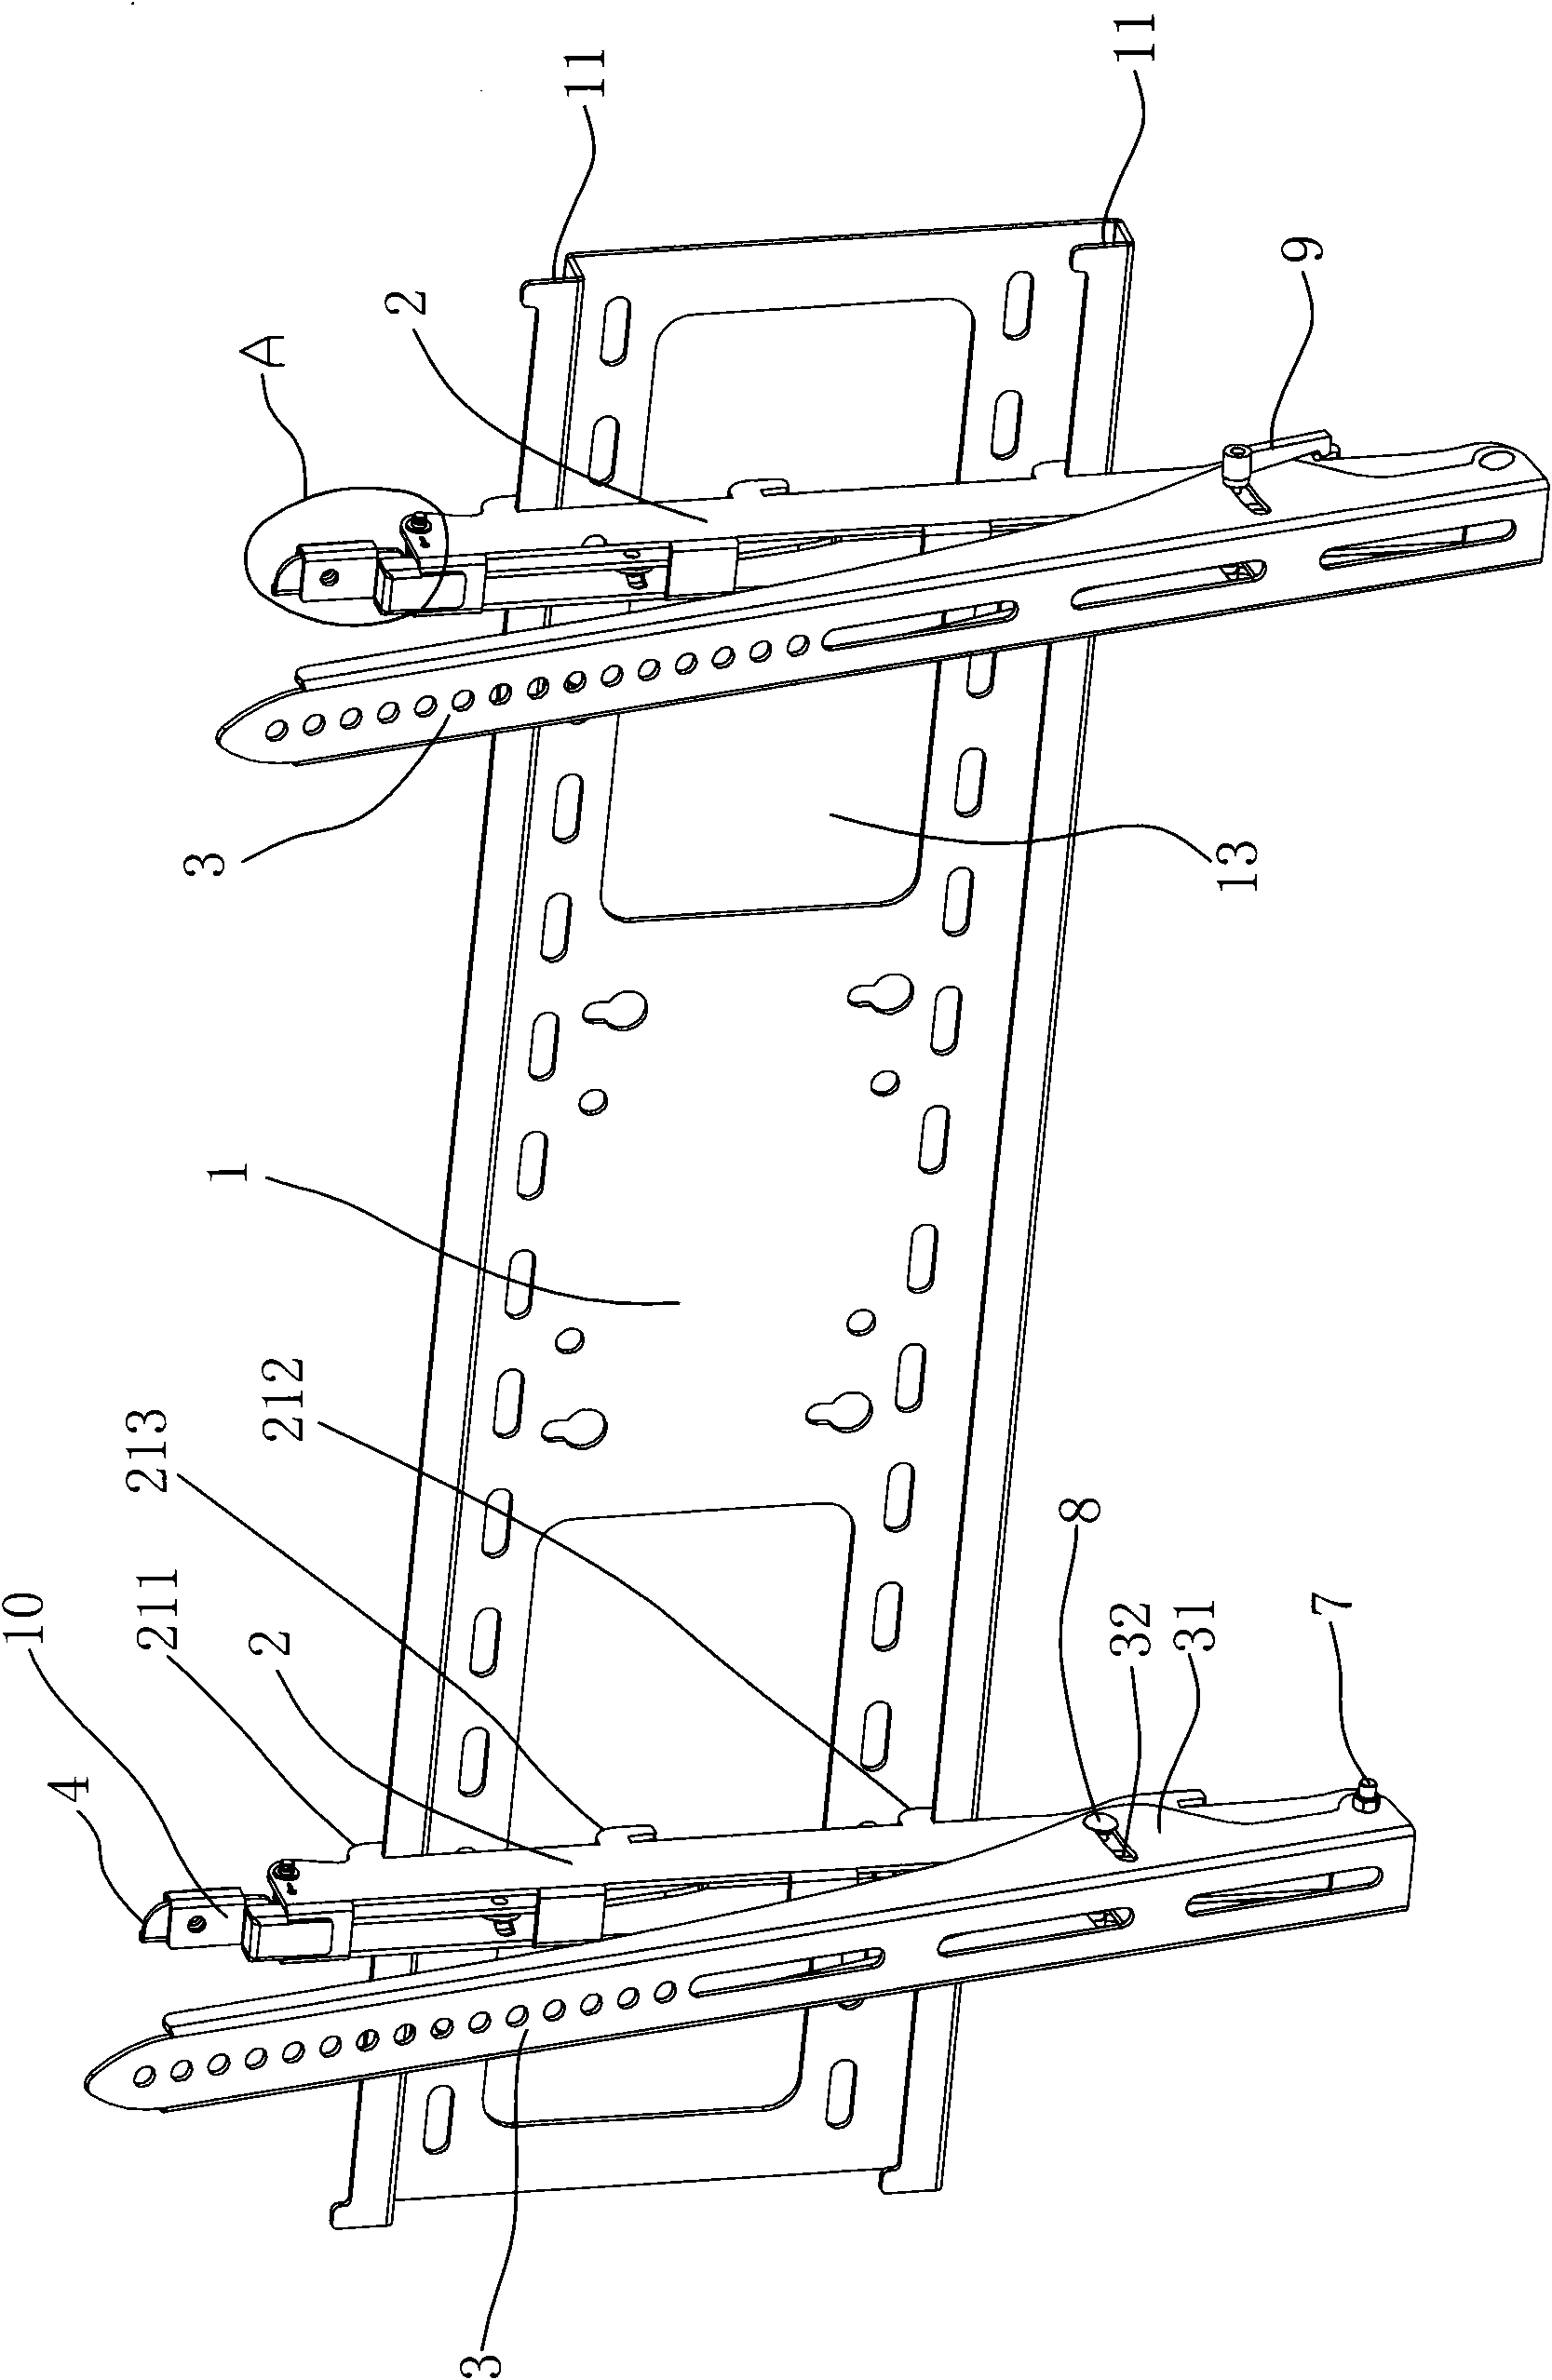 Self-locking wall hanging support with adjustable angle for flat panel display